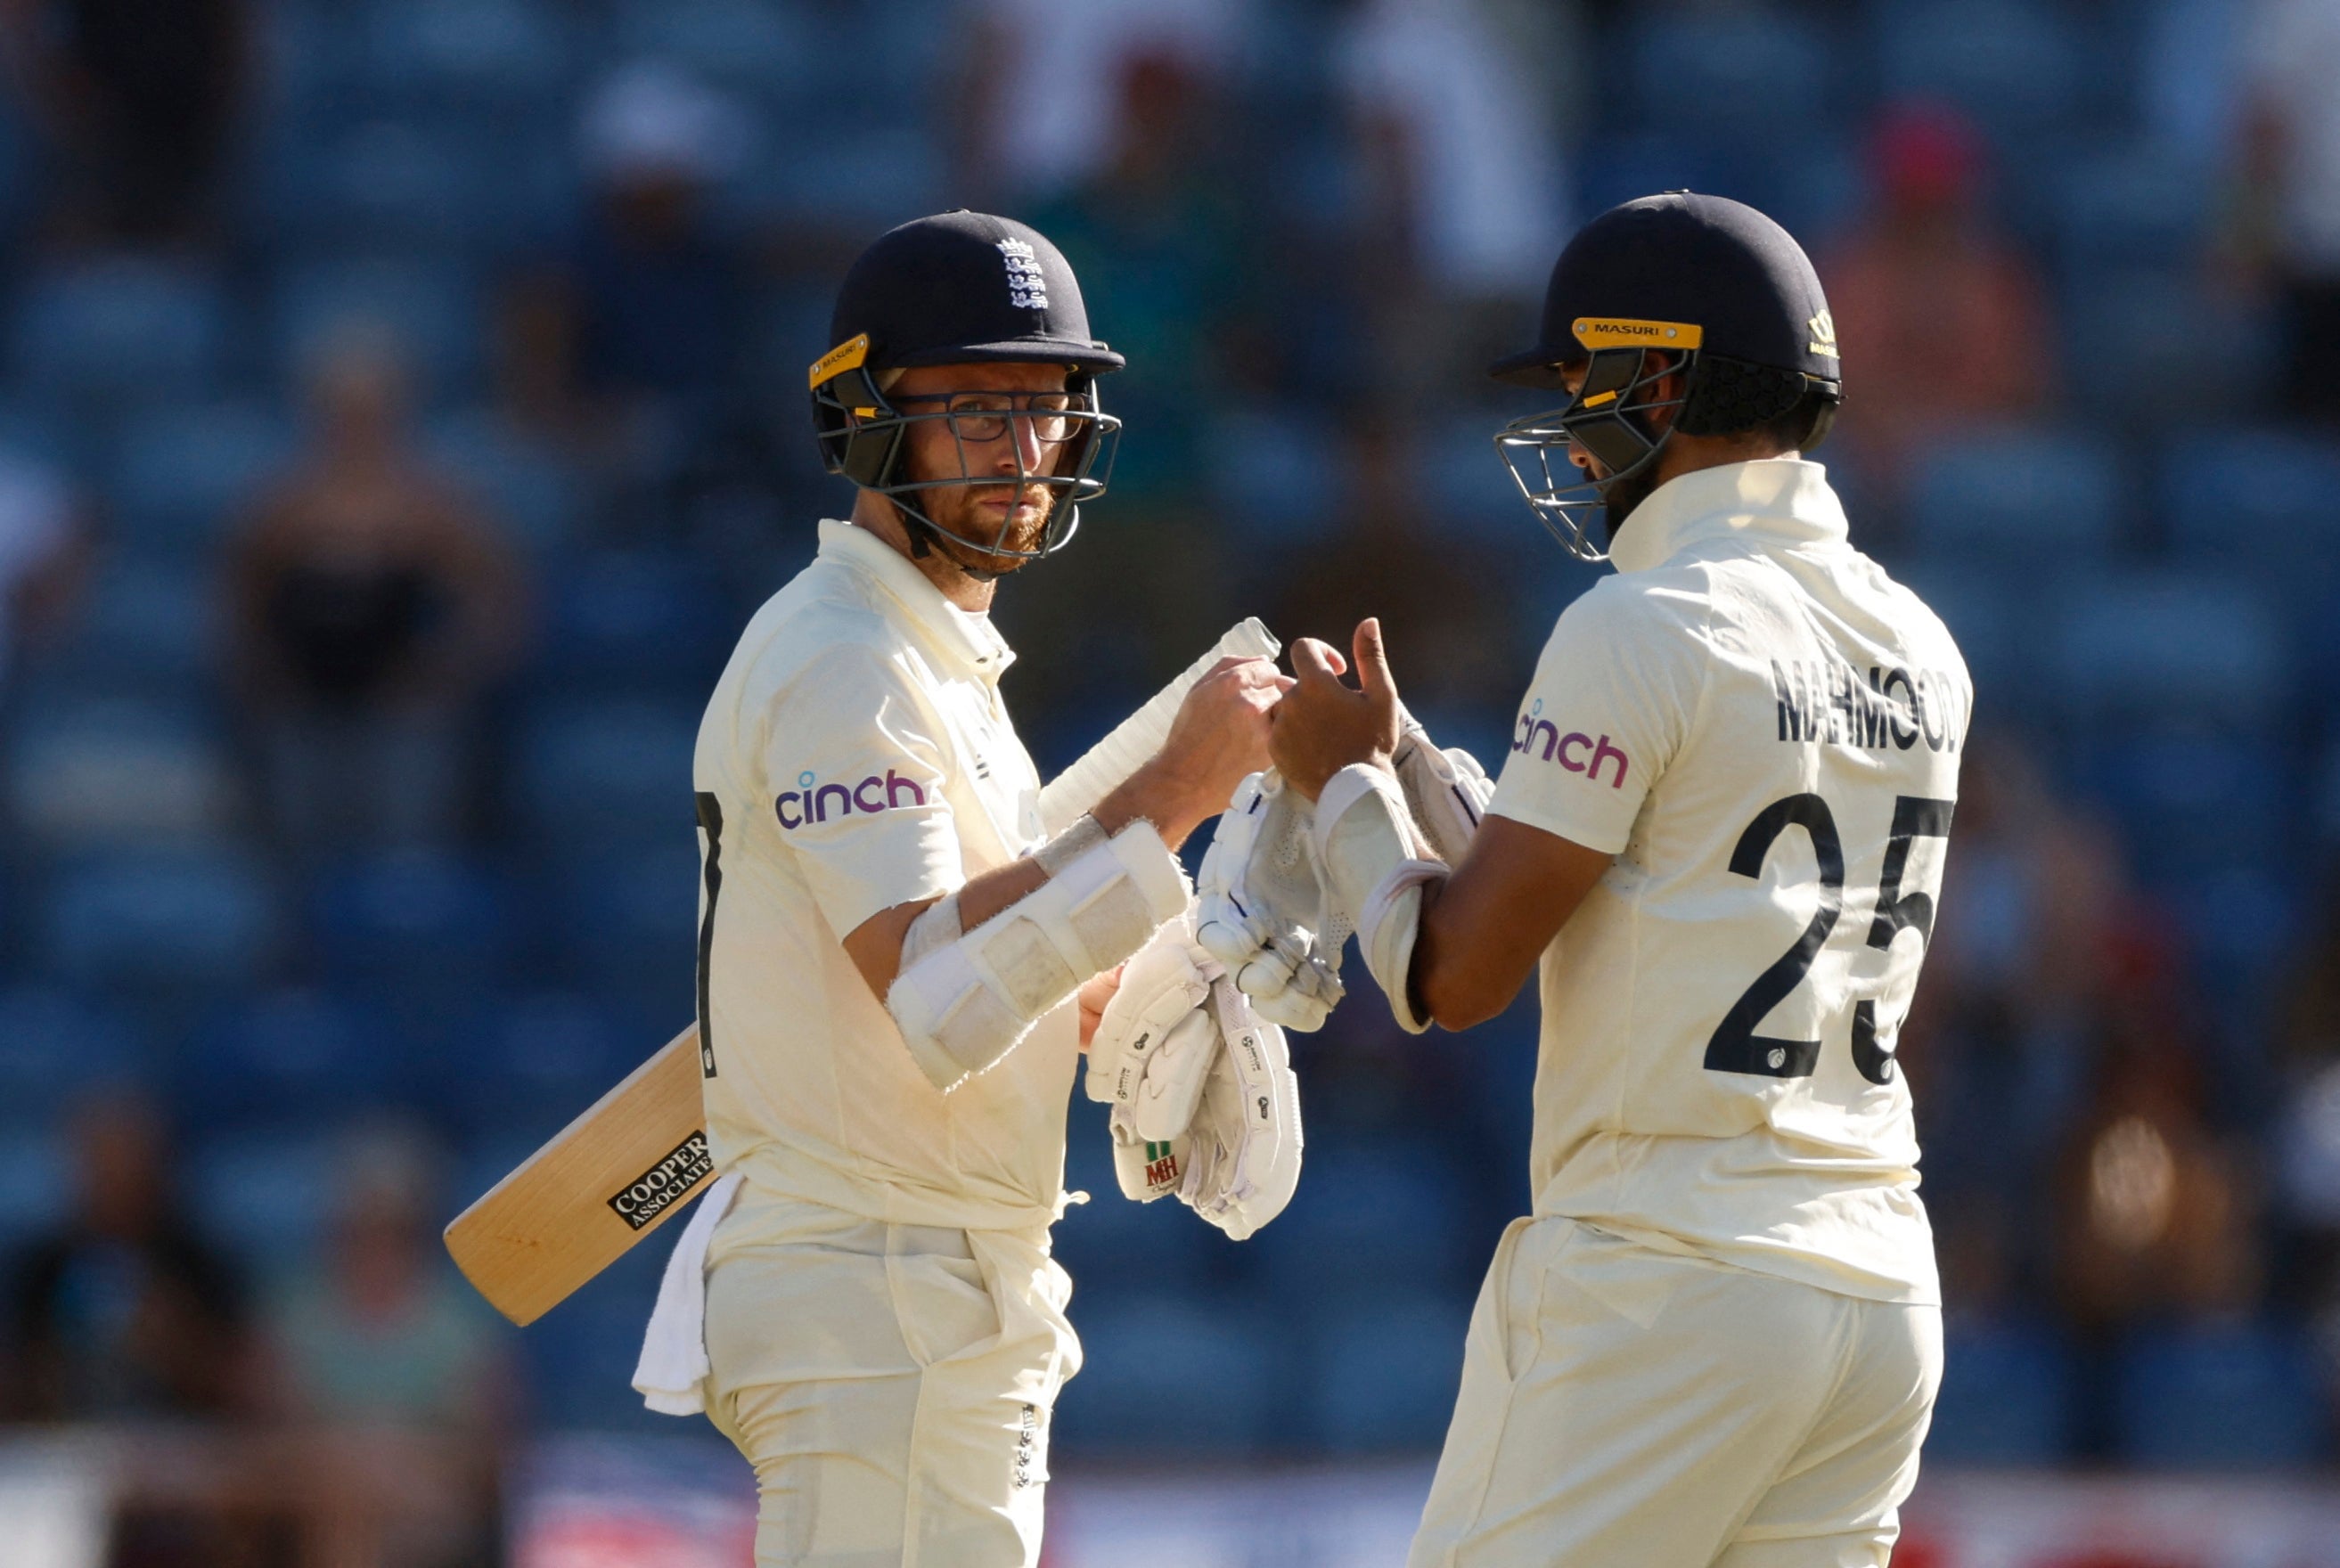 Jack Leach and Saqib Mahmood produced an unlikely final-wicket stand to salvage England’s day